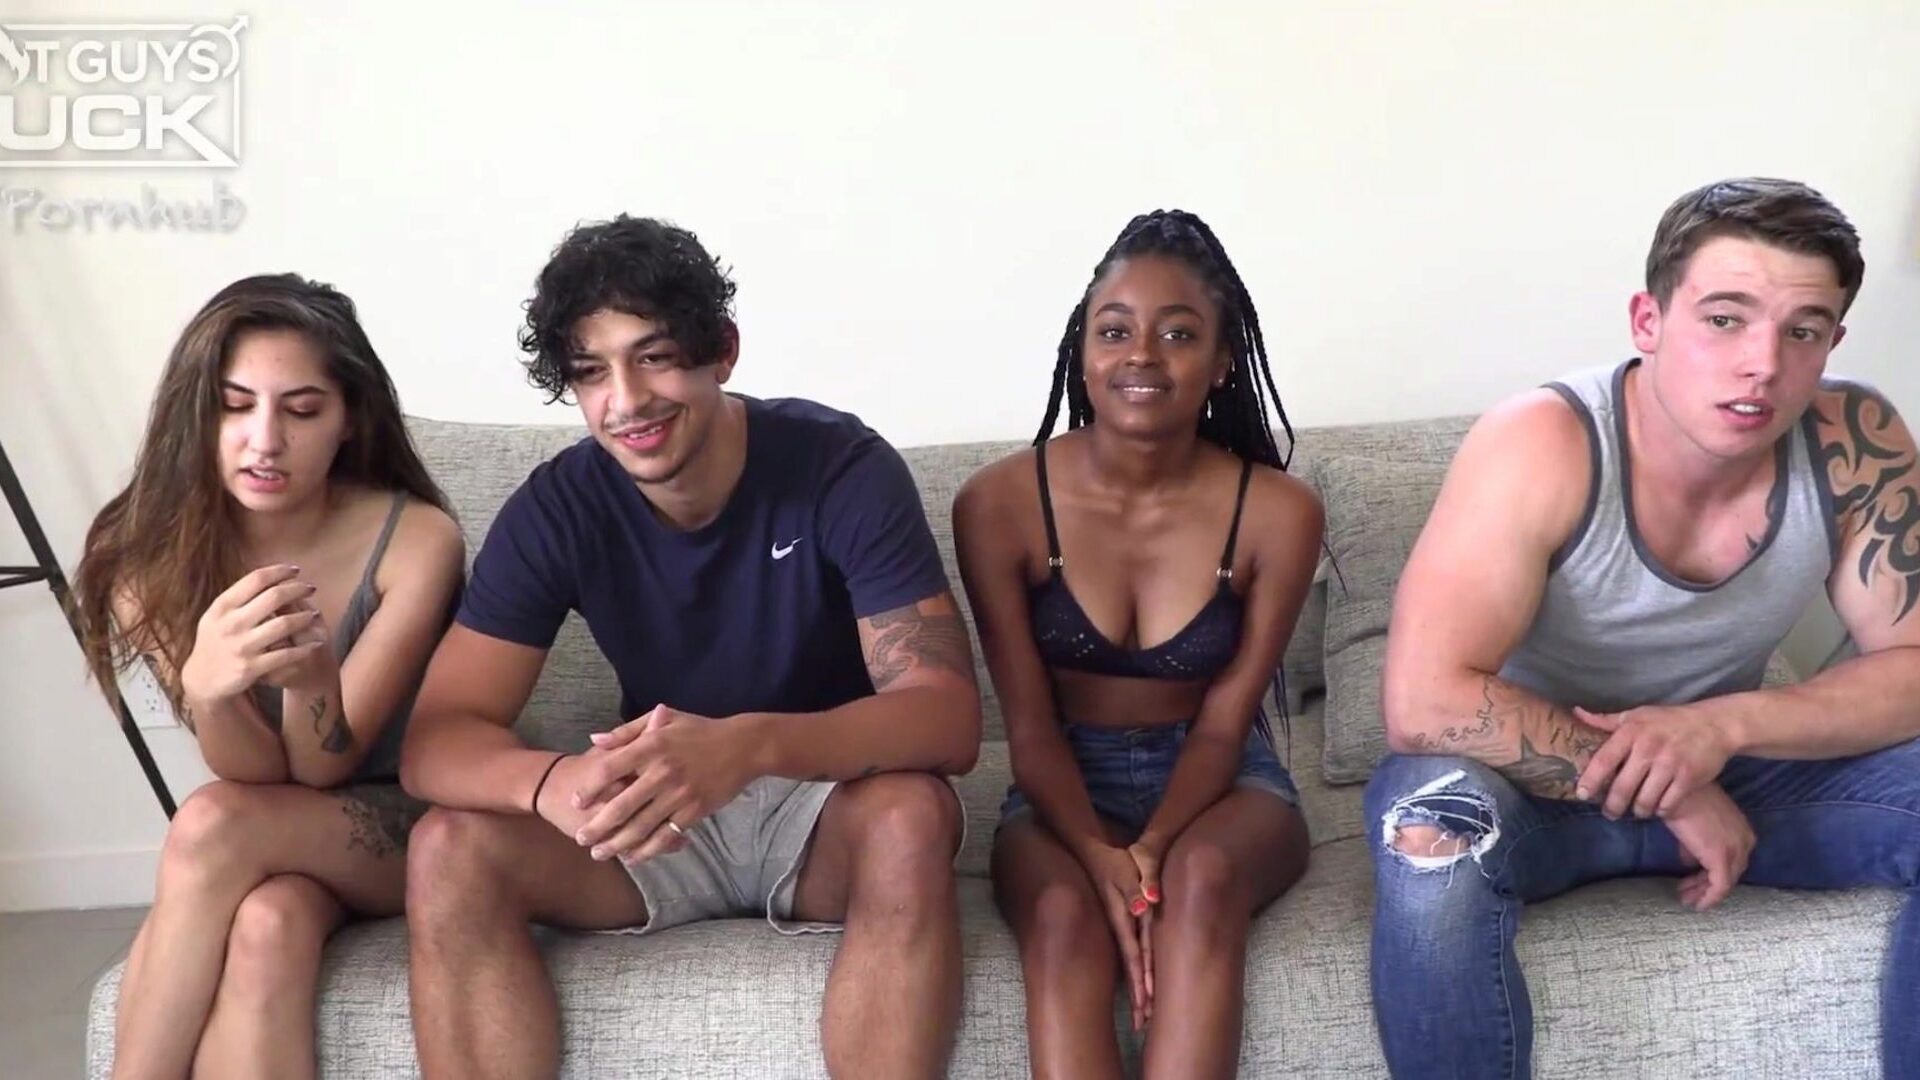 Group Fuck Ends With Two Teens And A Lot Of Cum! Aug 13th 2021